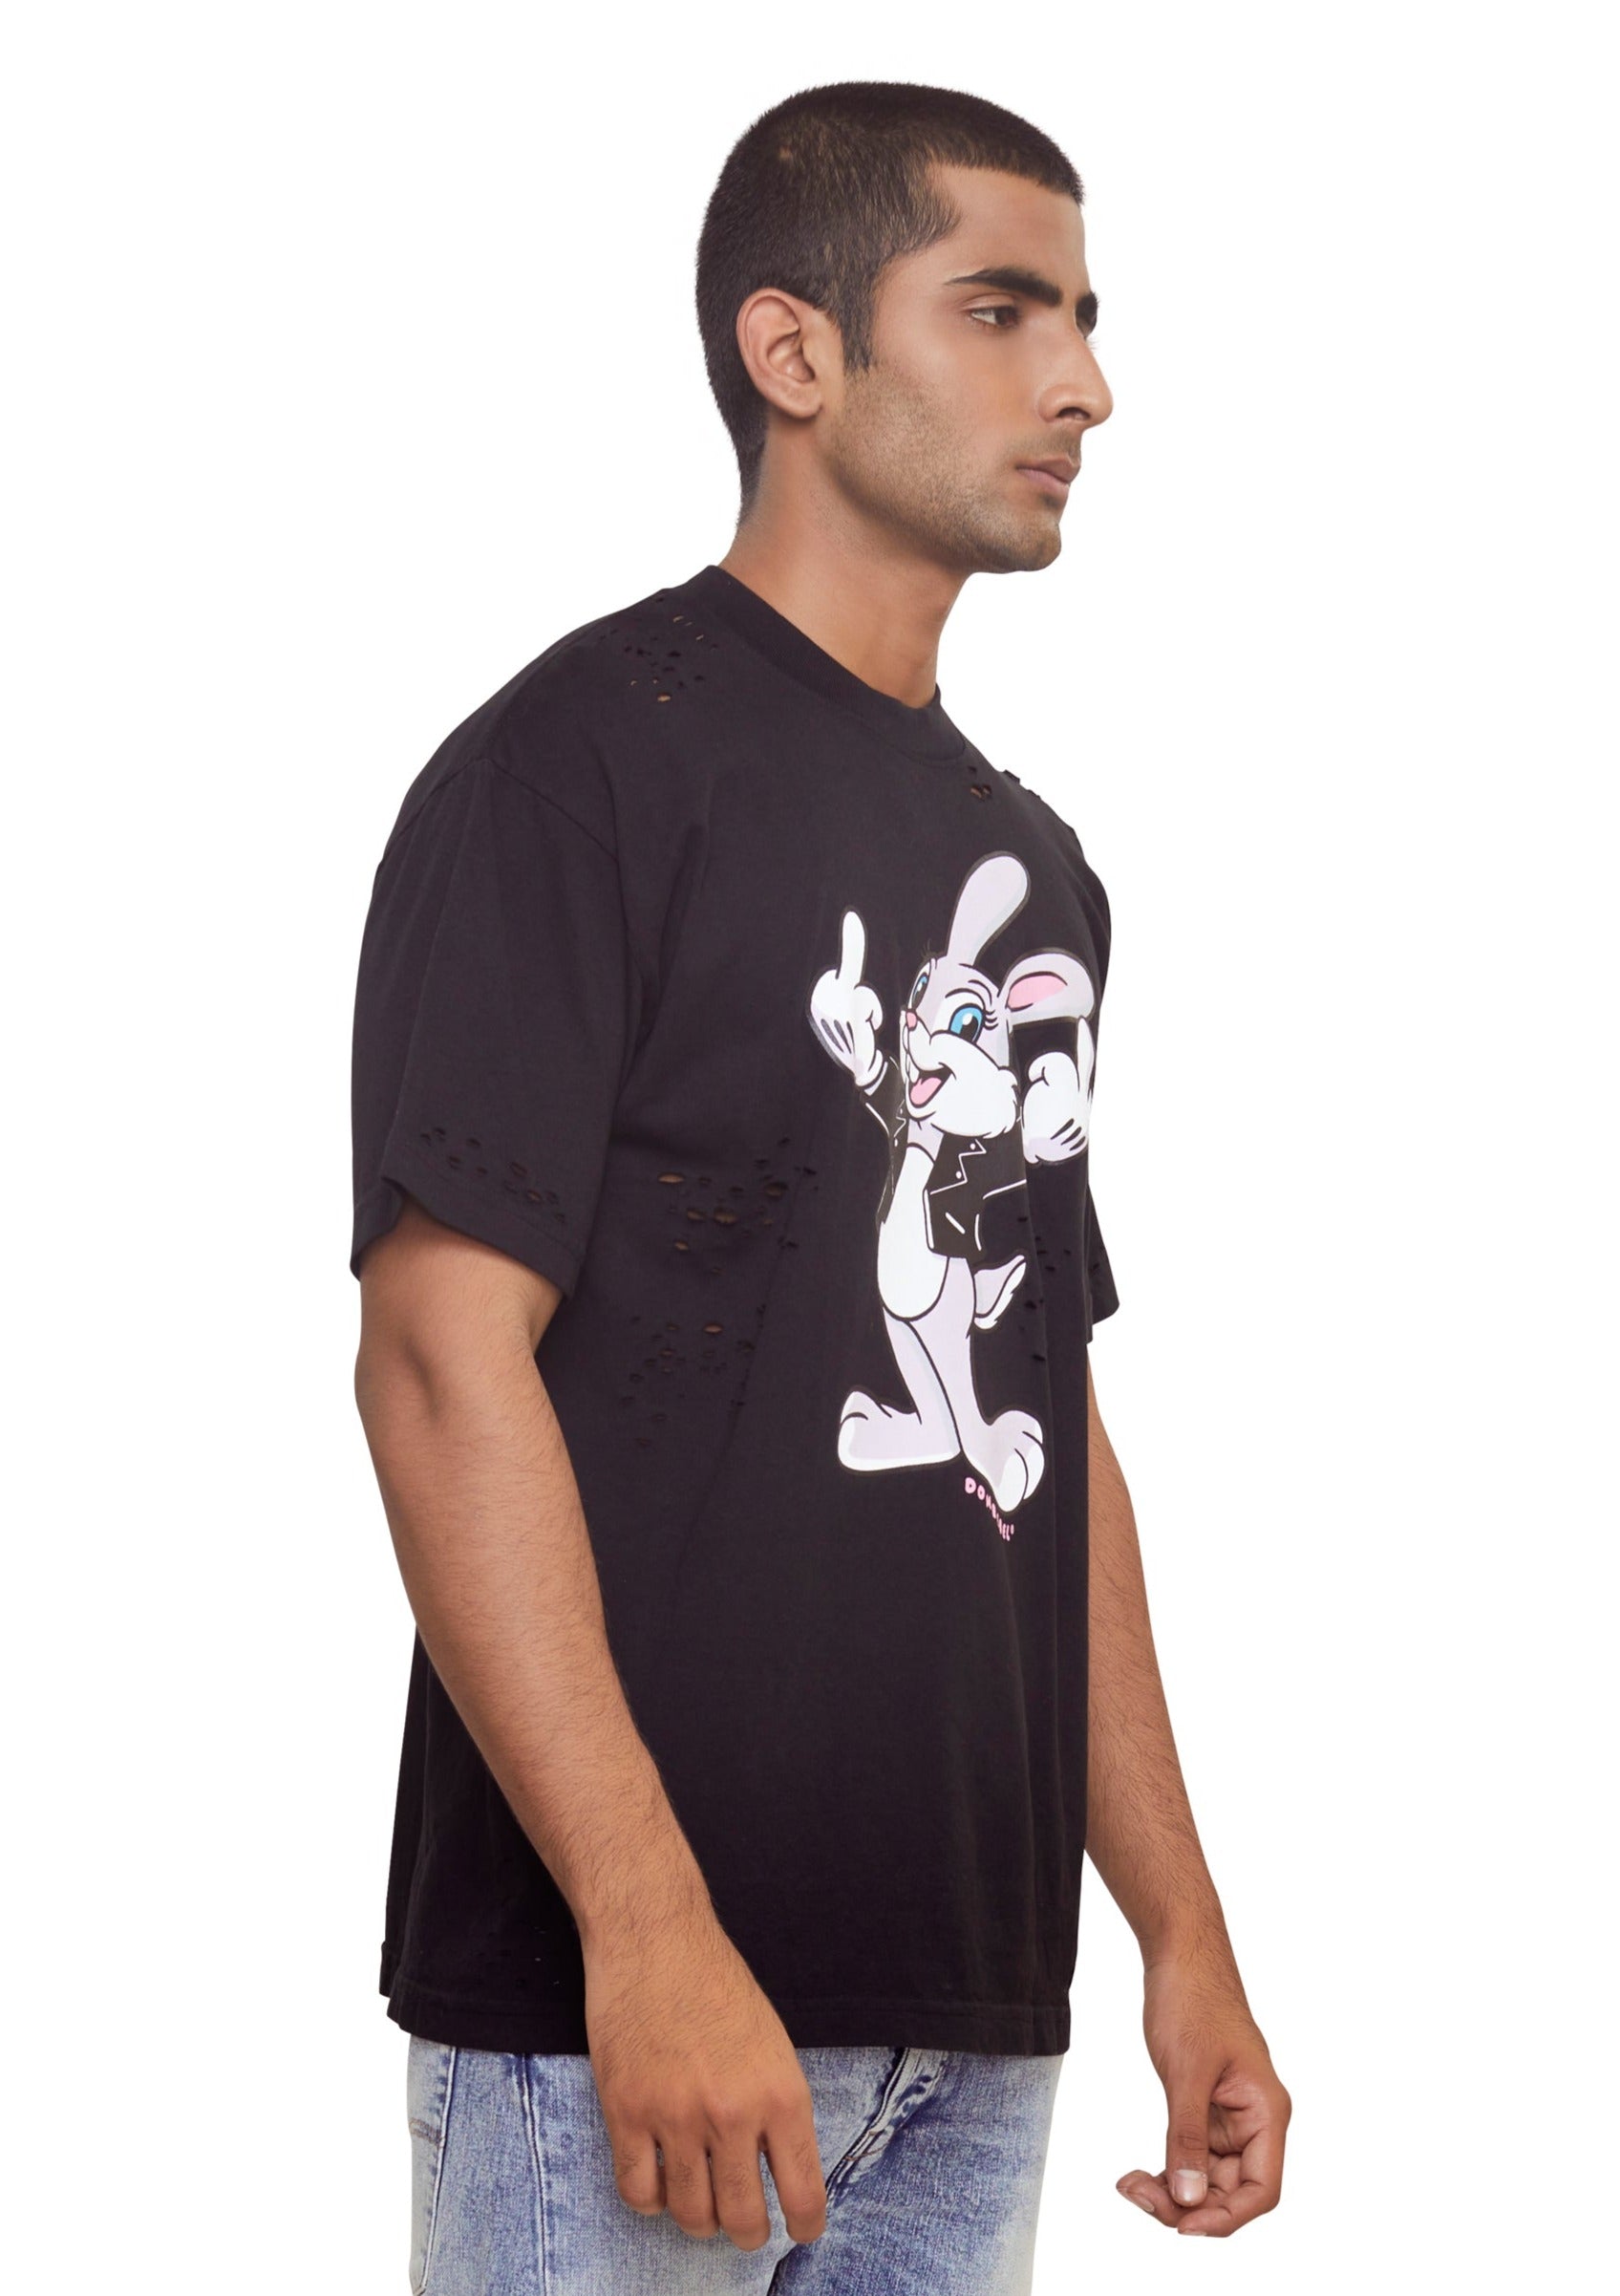 Black Rabbit graphic-print distressed cotton T-shirt from the brand Domrebel